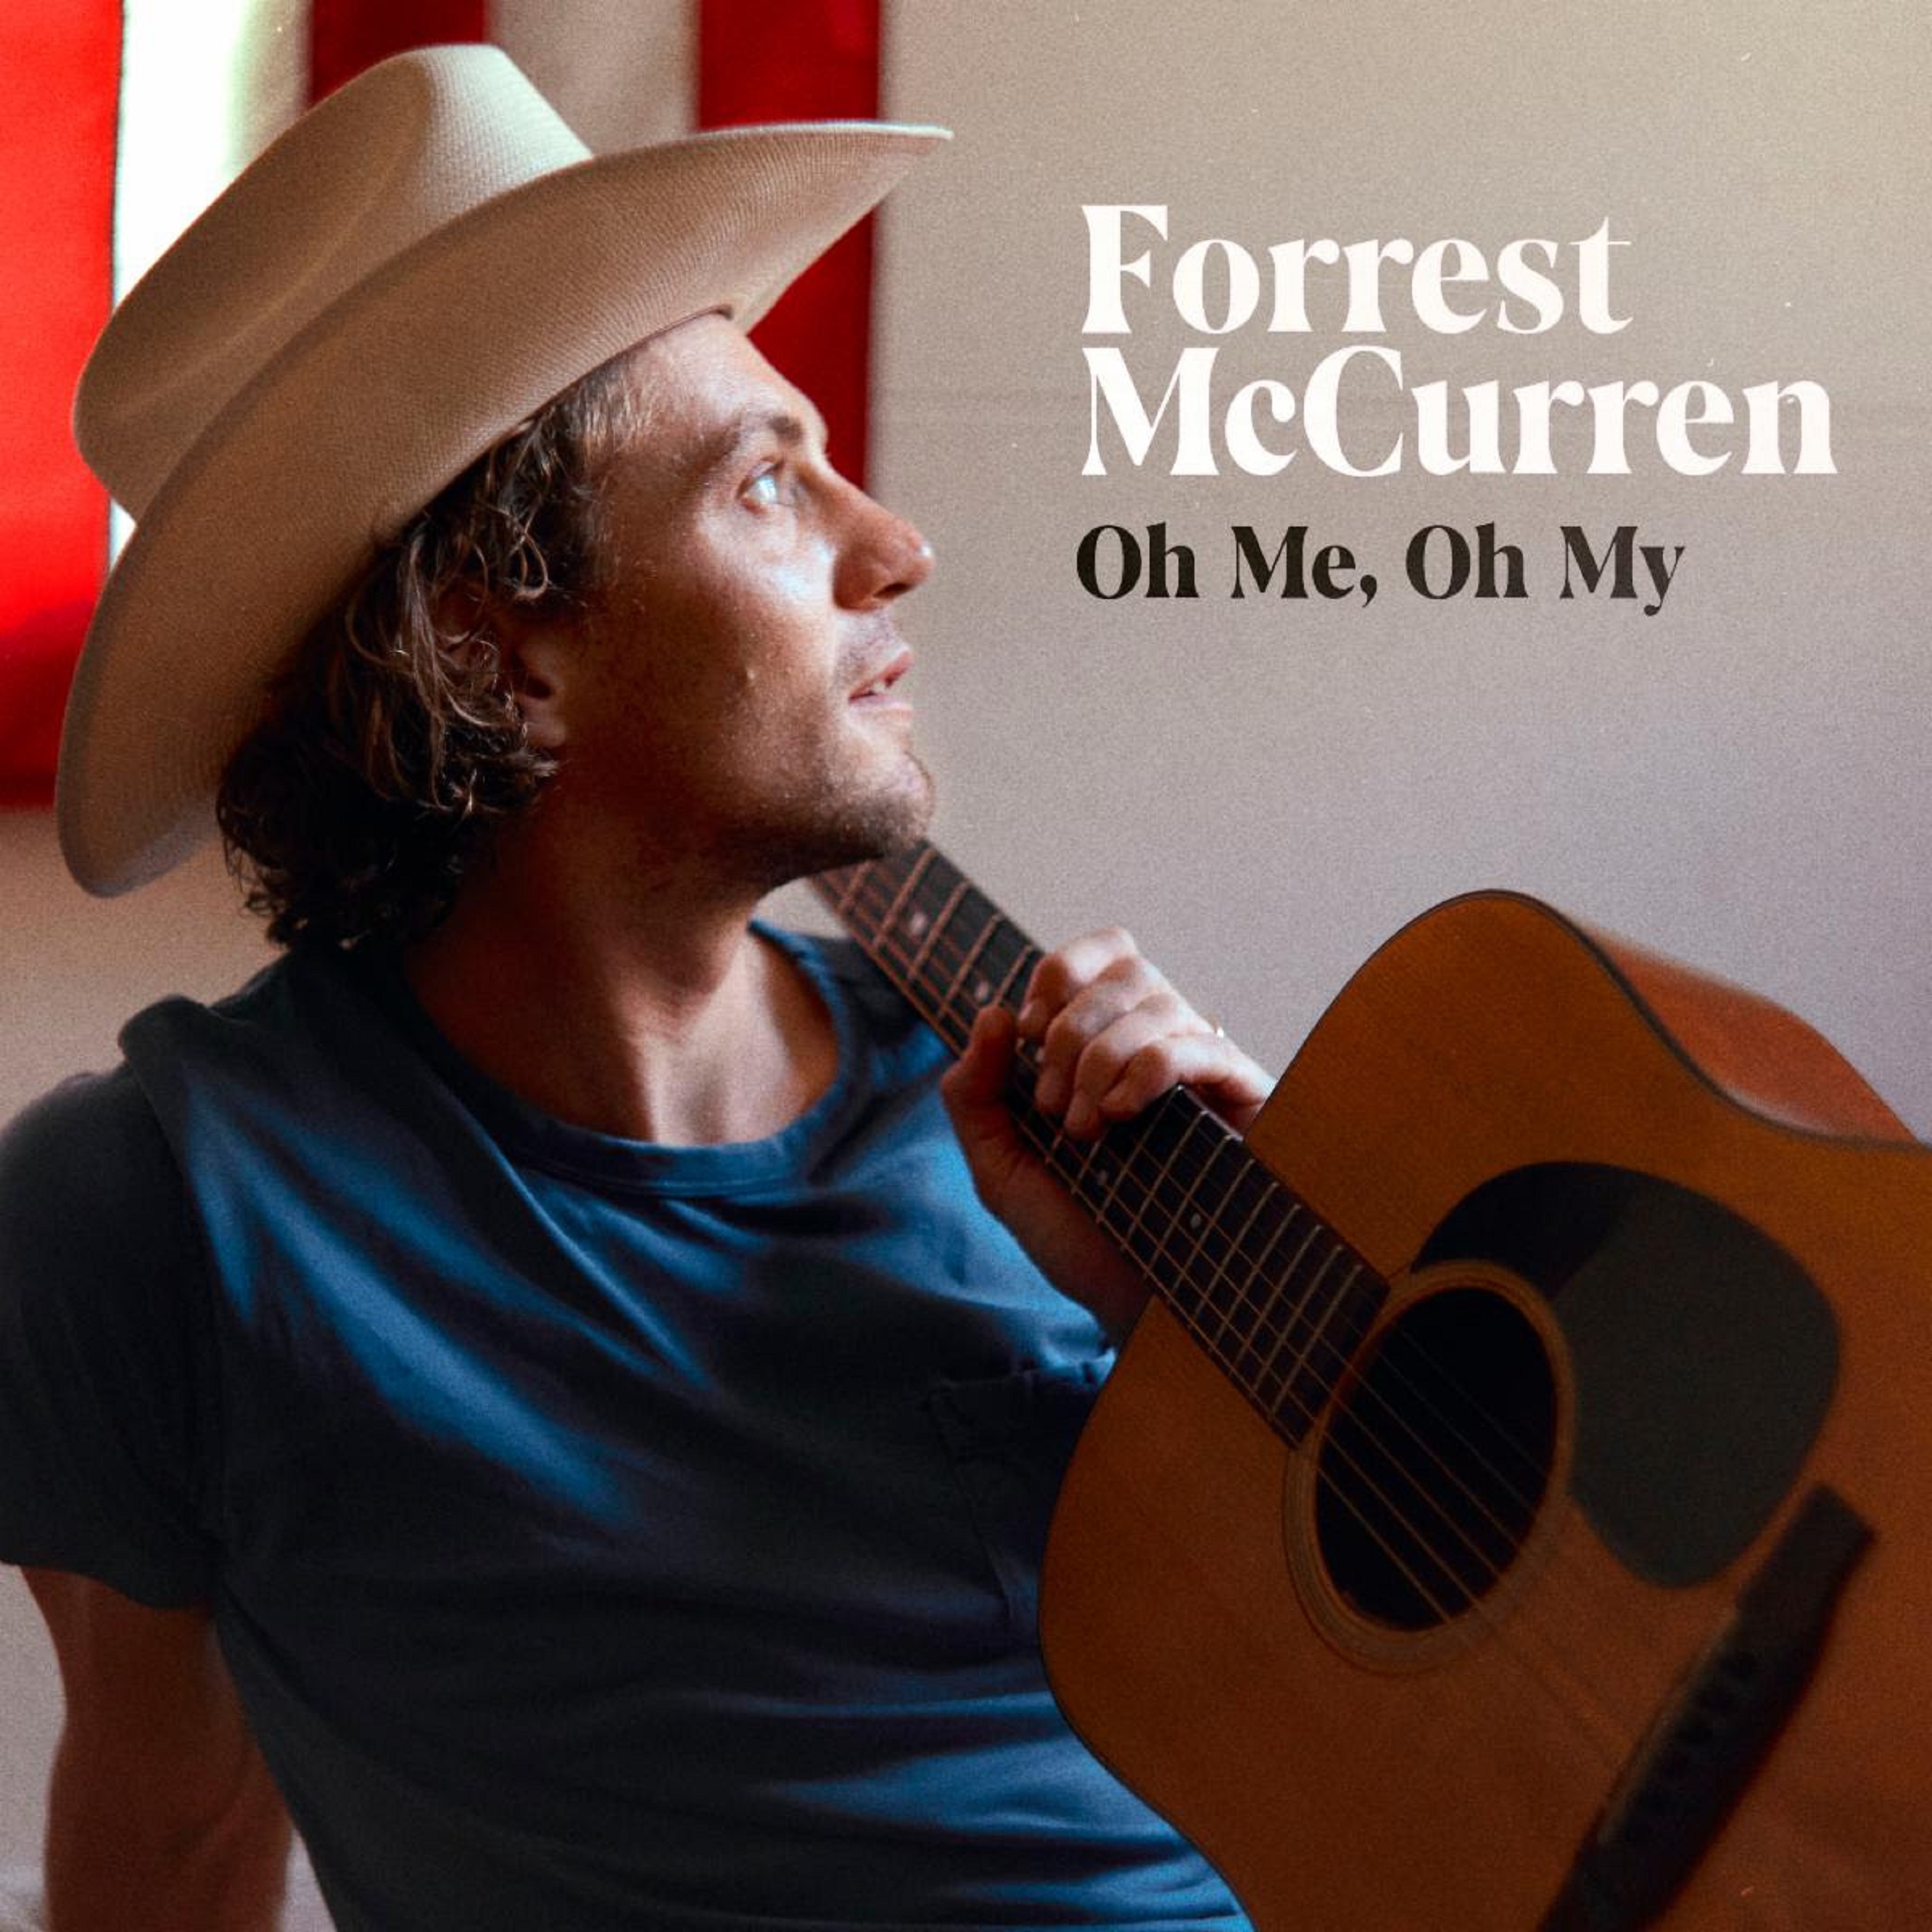 Hear Forrest McCurren’s Feel-Good Road Song “Little Rock” From Upcoming Debut Album "Oh Me, Oh My"